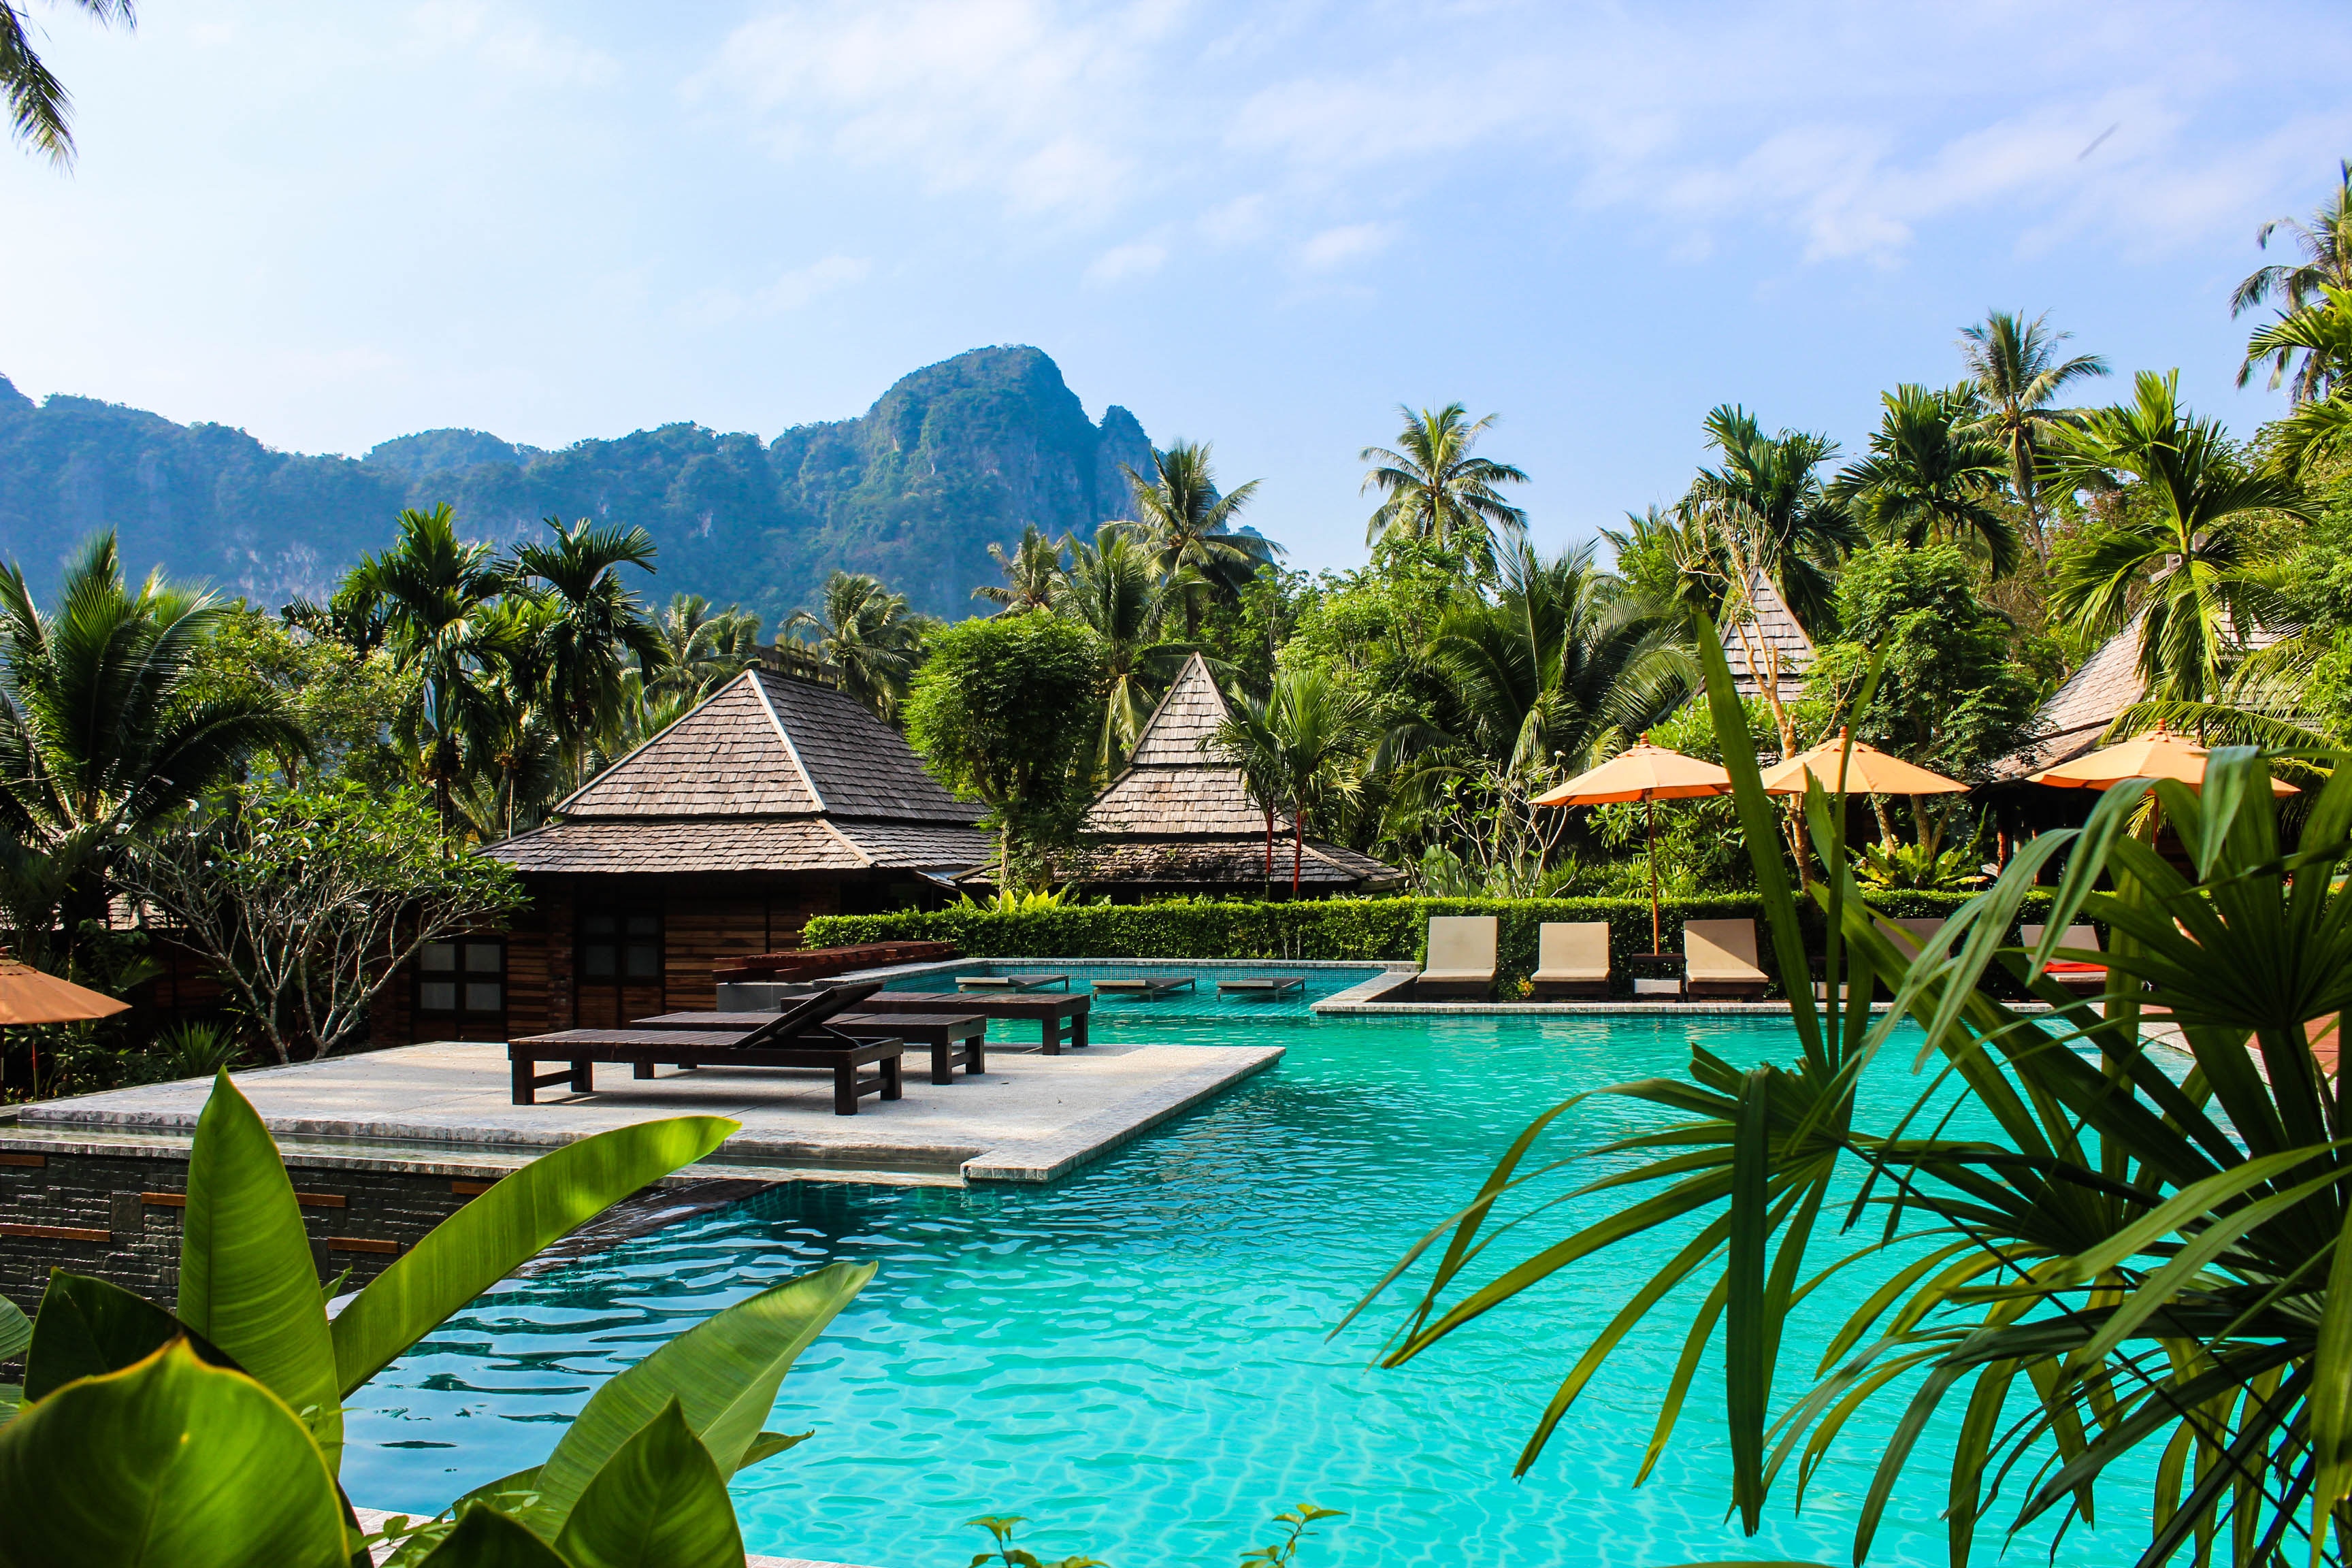 Deal Alert: Round-Trip Flights To Thailand Are On Sale Right Now